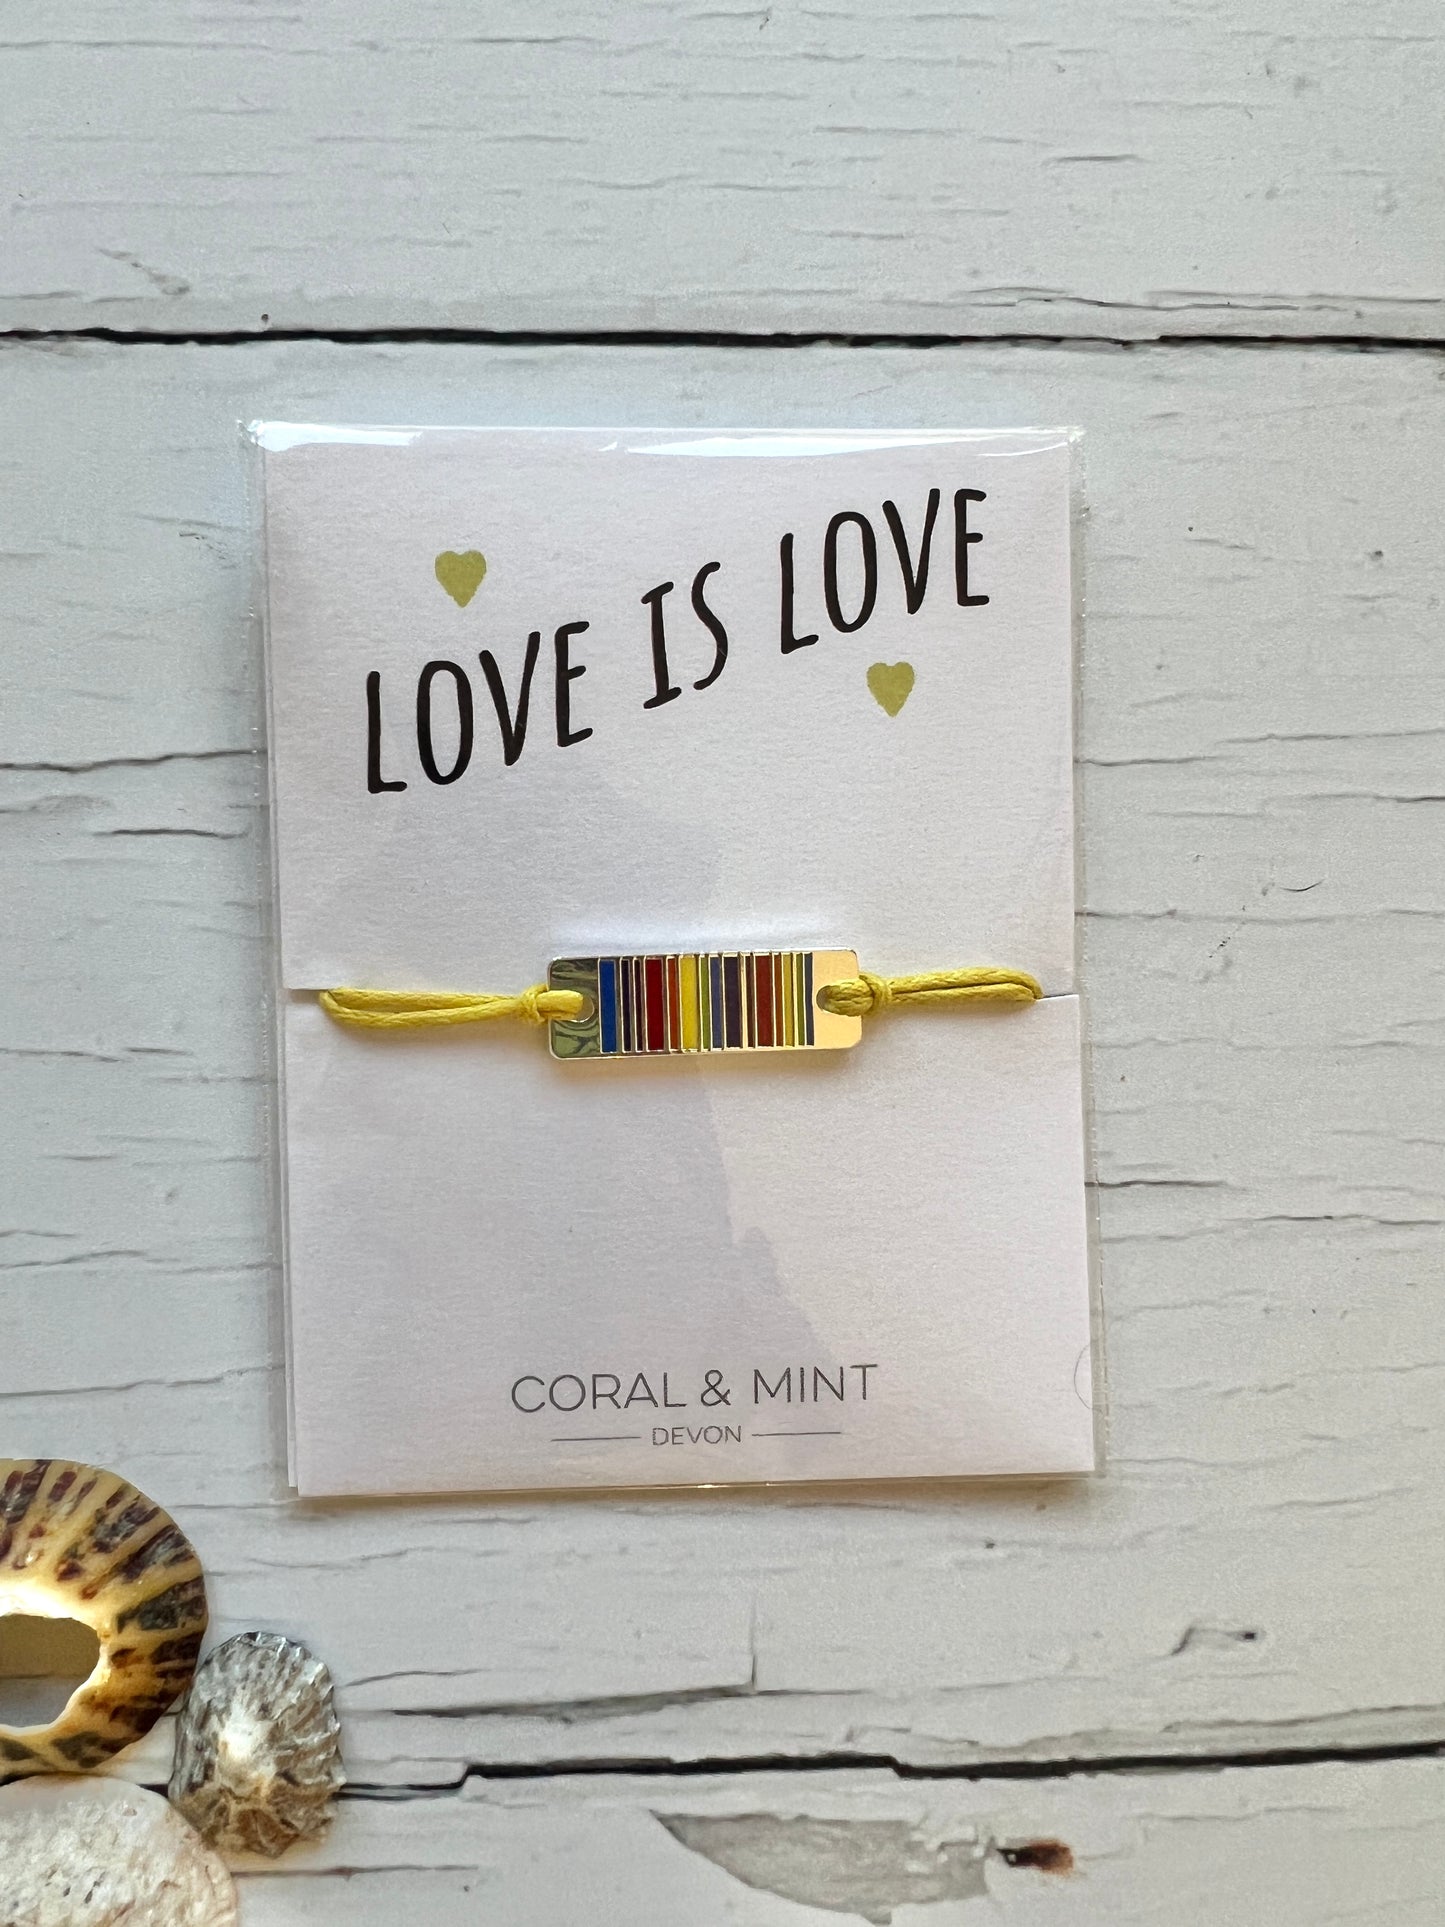 A string bracelet on a yellow cord with a silver rainbow striped charm. The text on the card reads Love is Love